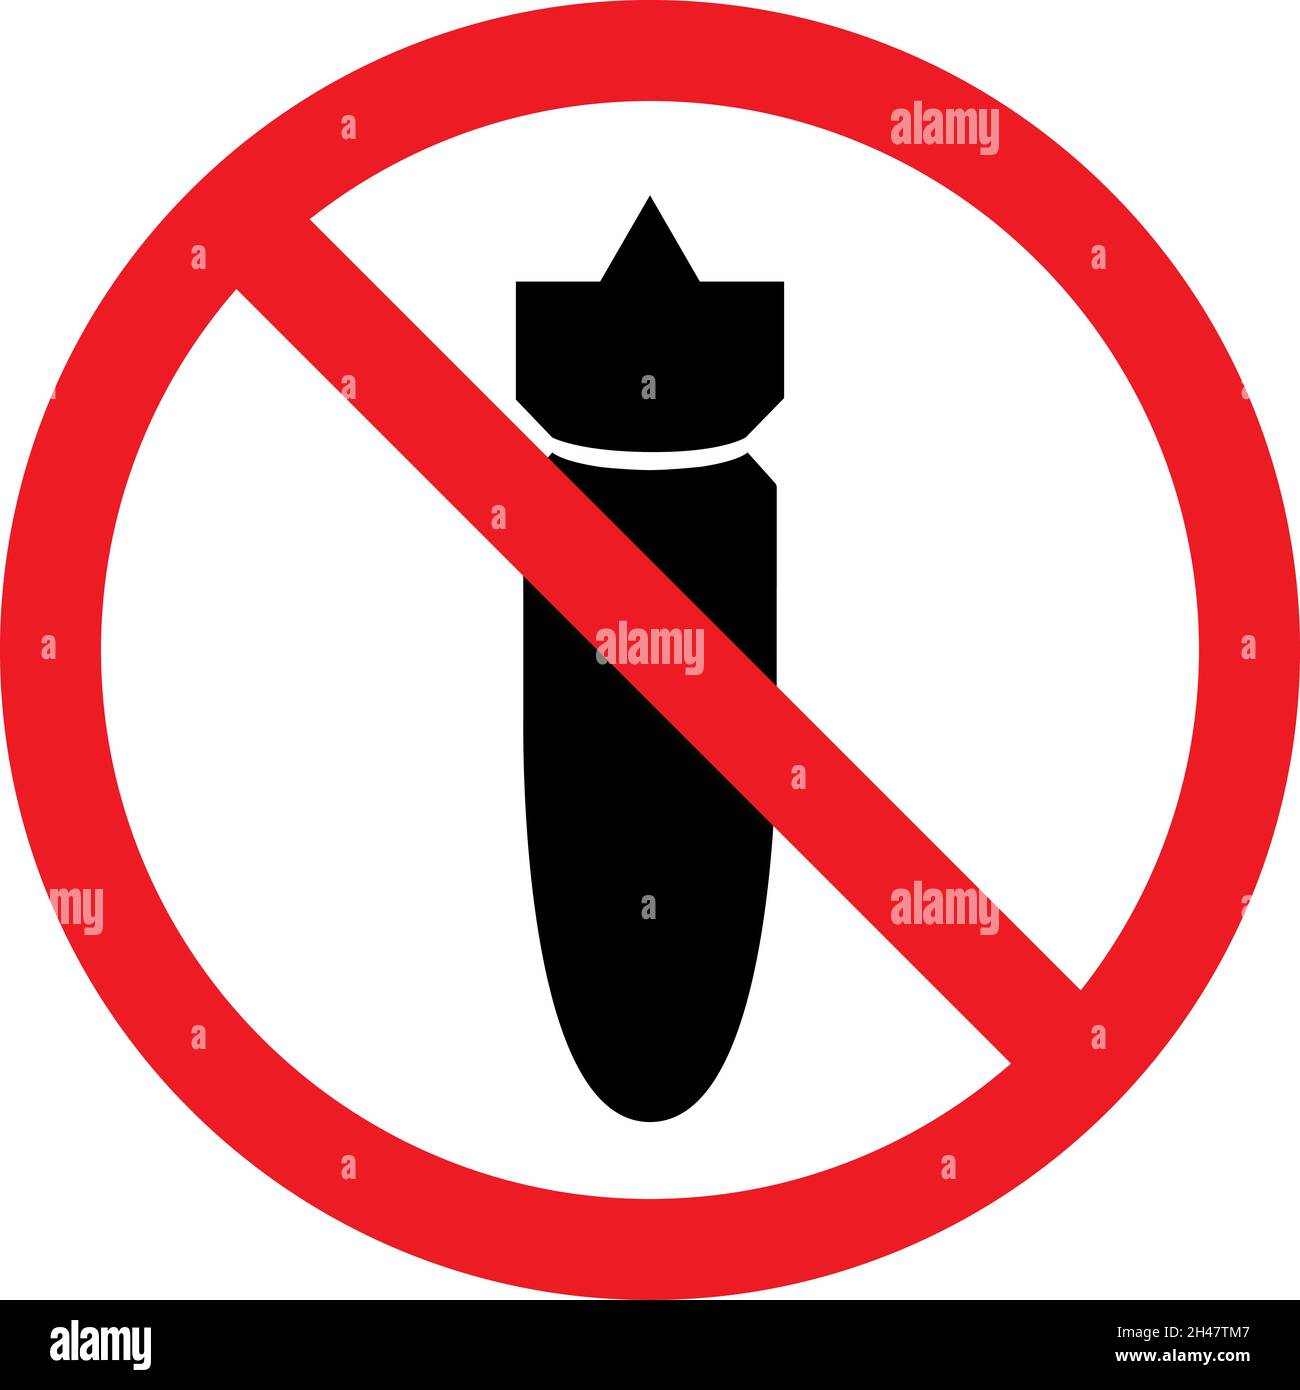 No bombing sign. Red circle background. No more disastrous wars. Stock Vector